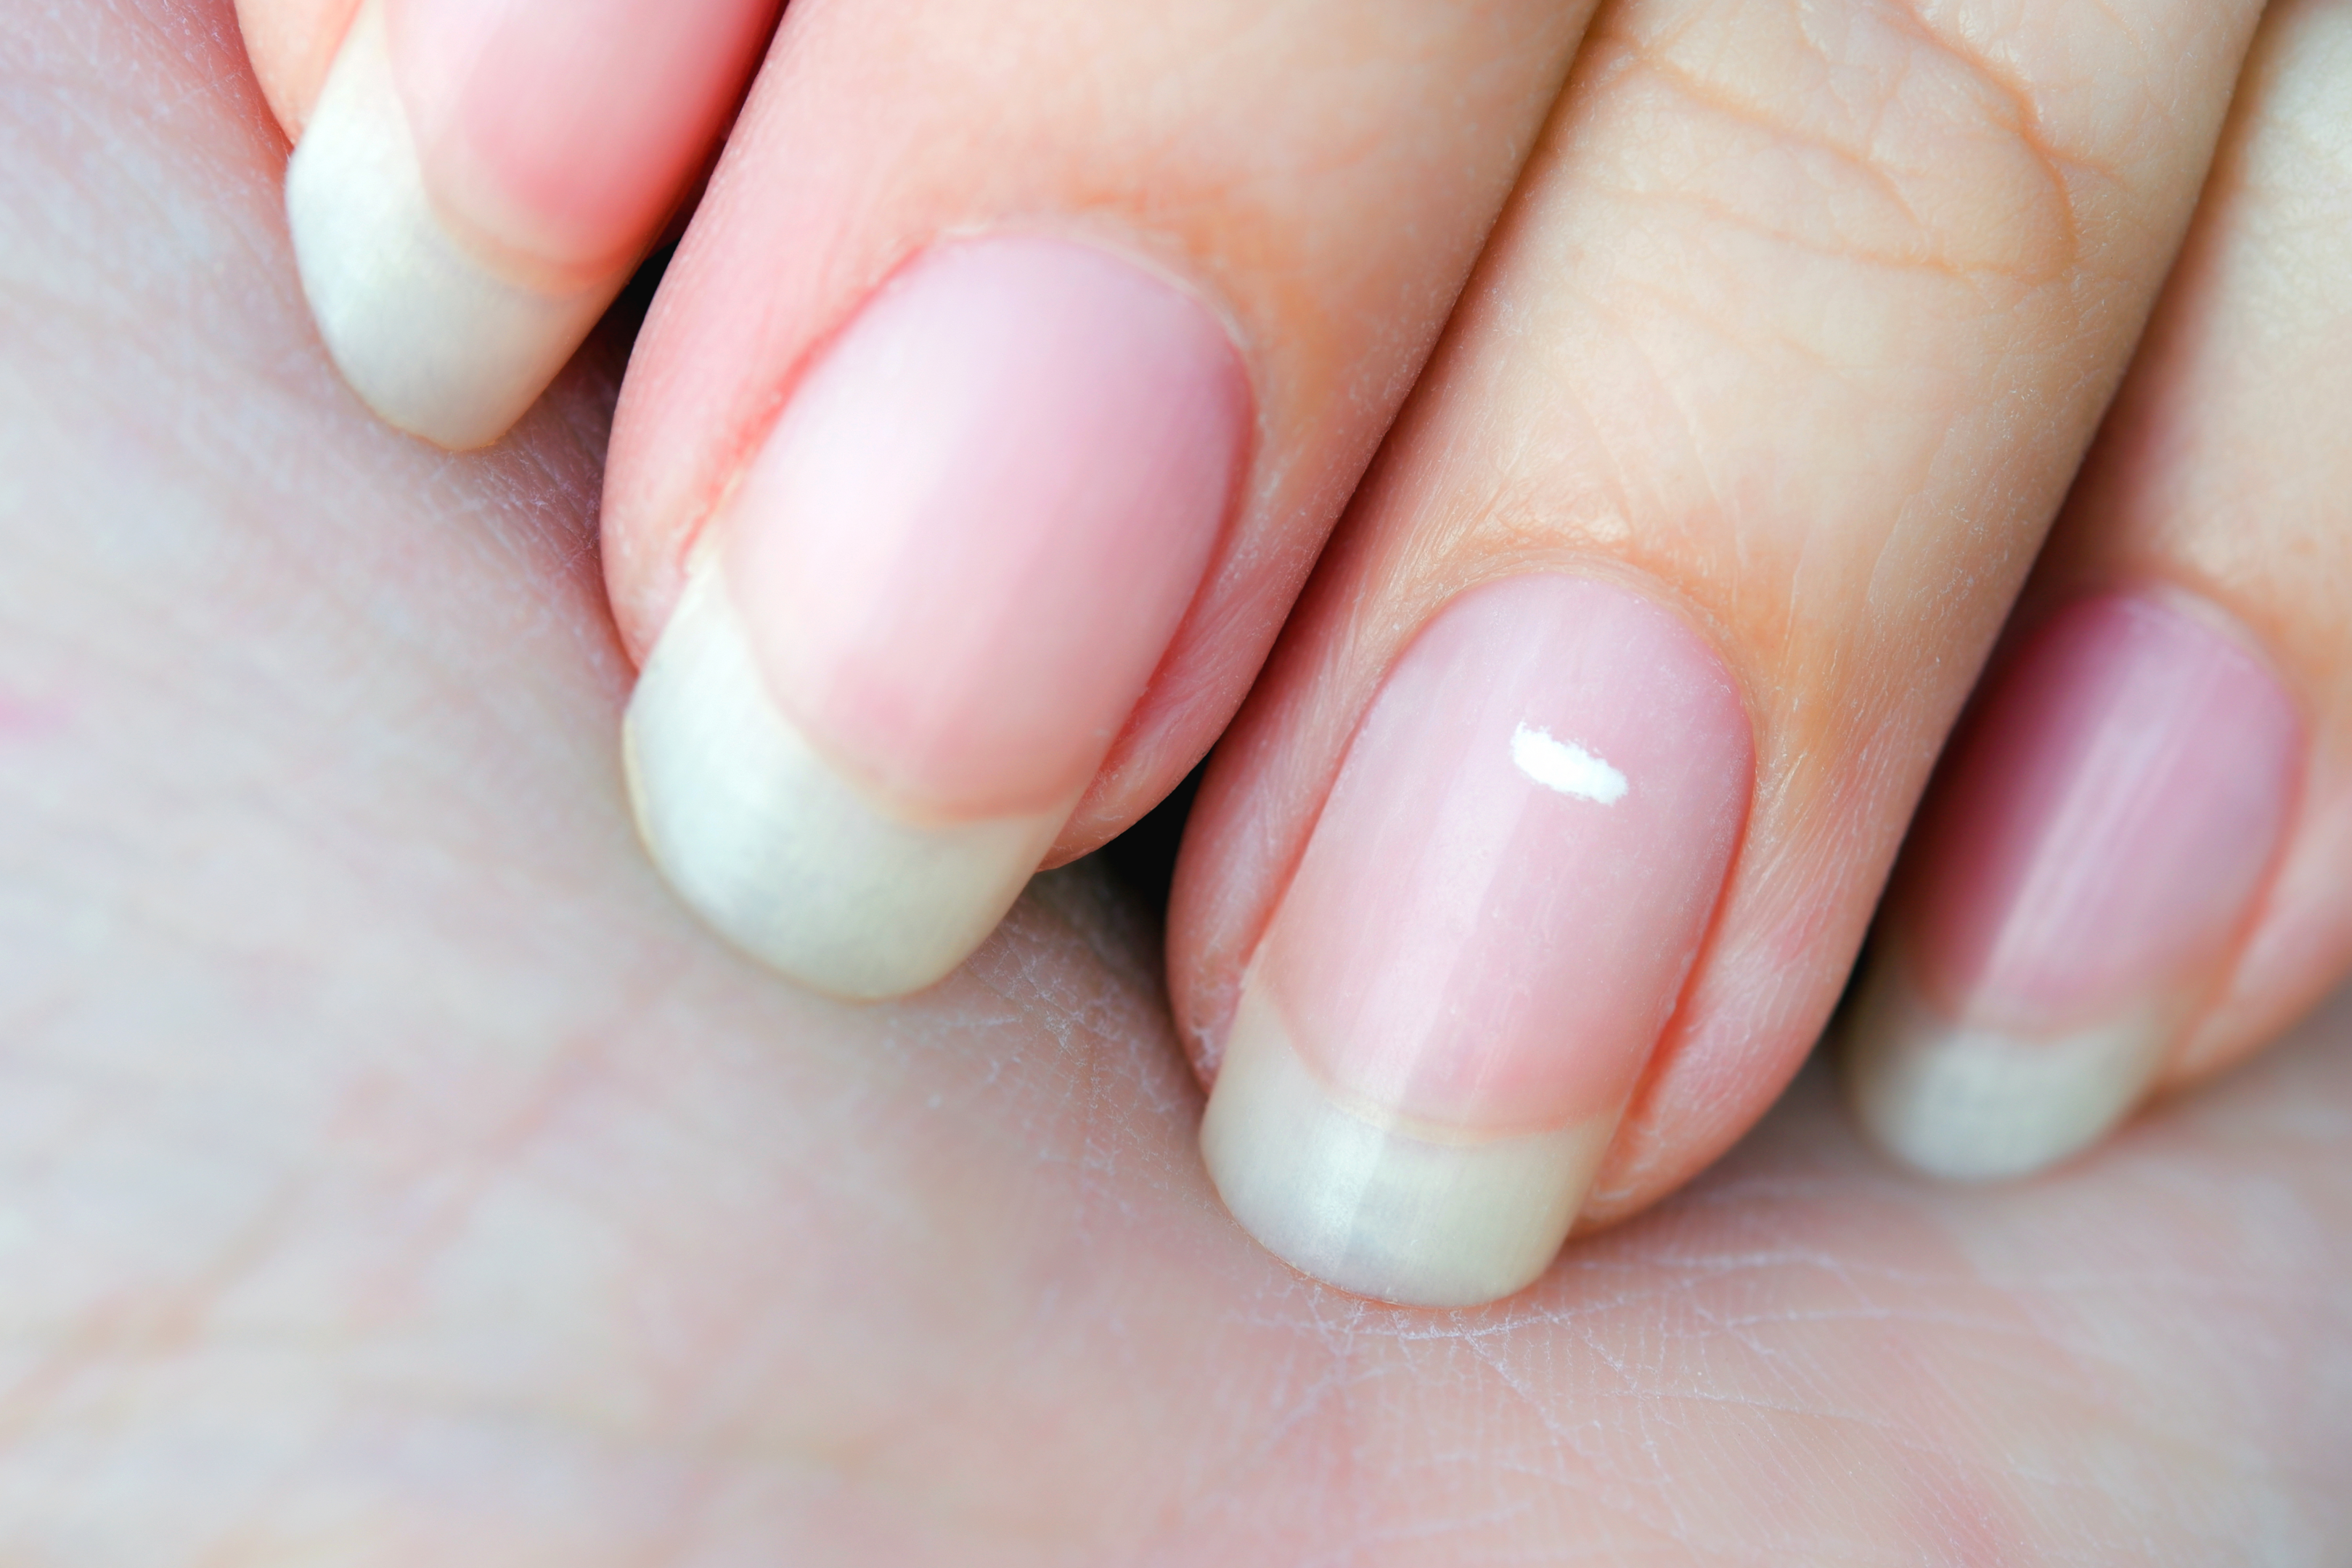 Photograph of nails with leukonychia.